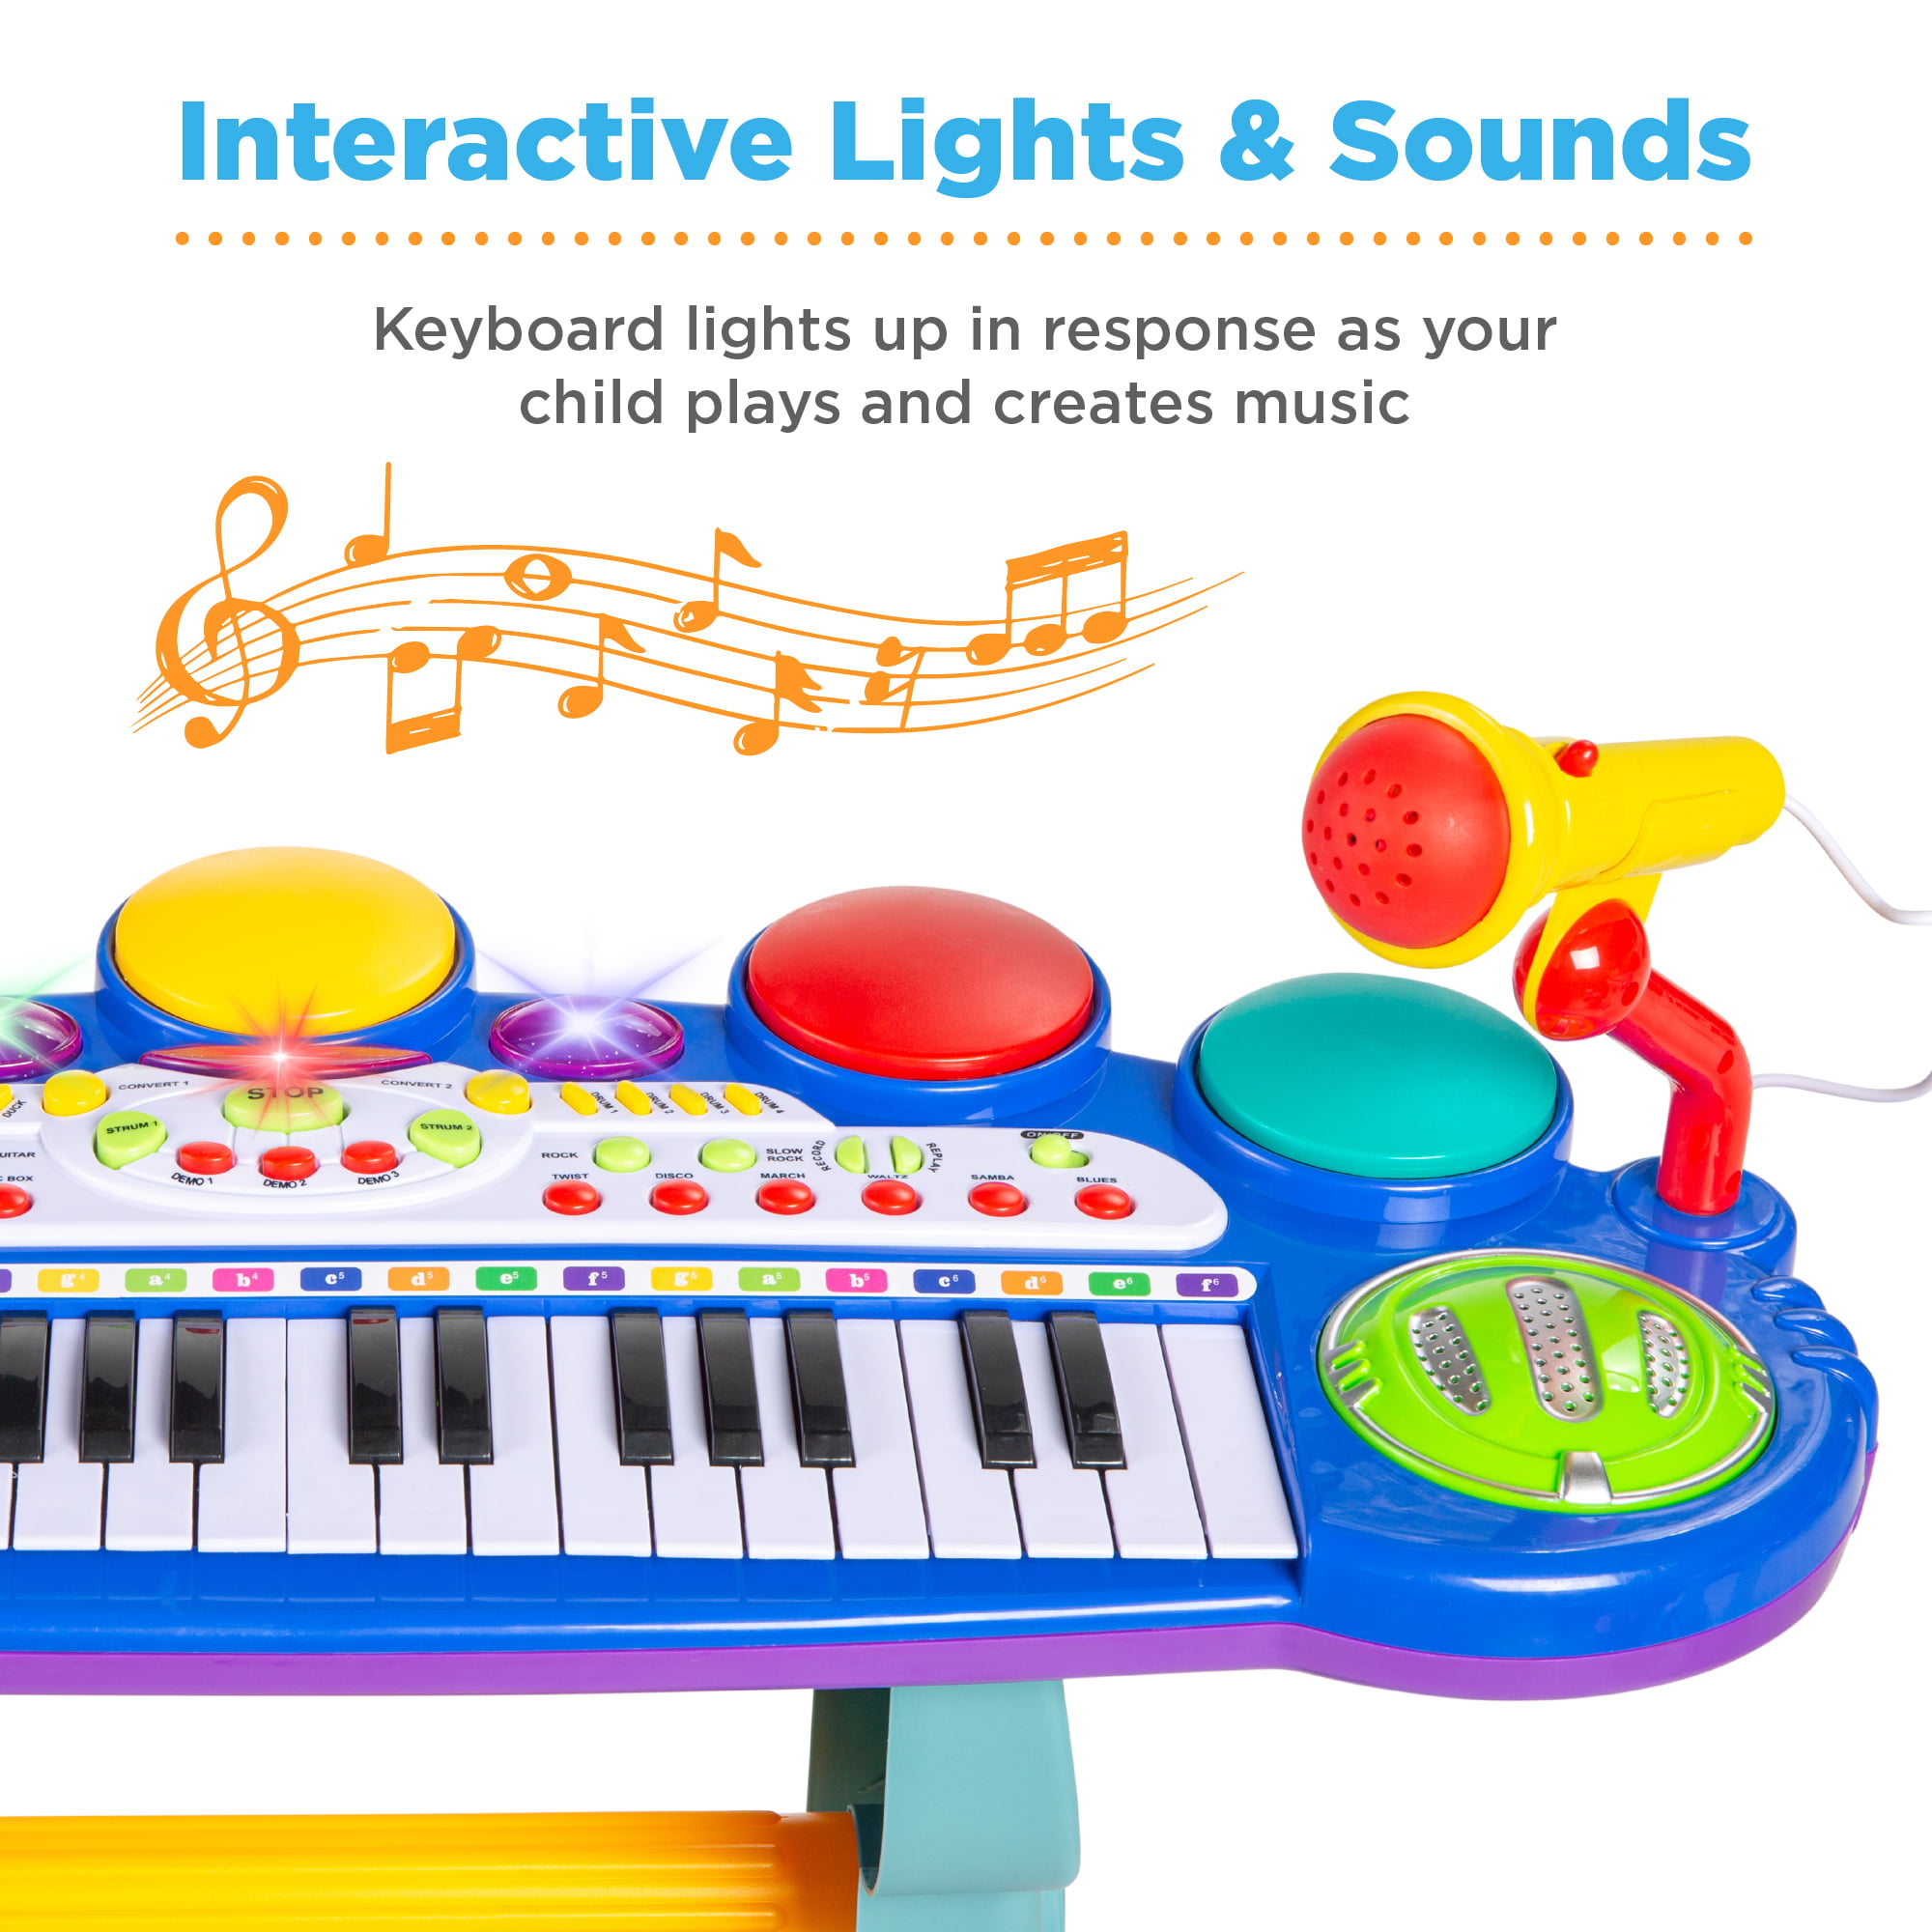 Zwbfu 37 Keys Kids Musical Piano Electronic Piano Keyboard Toy Musical Instrument Toy with Microphone for Boys Girls Over 3 Years Old 